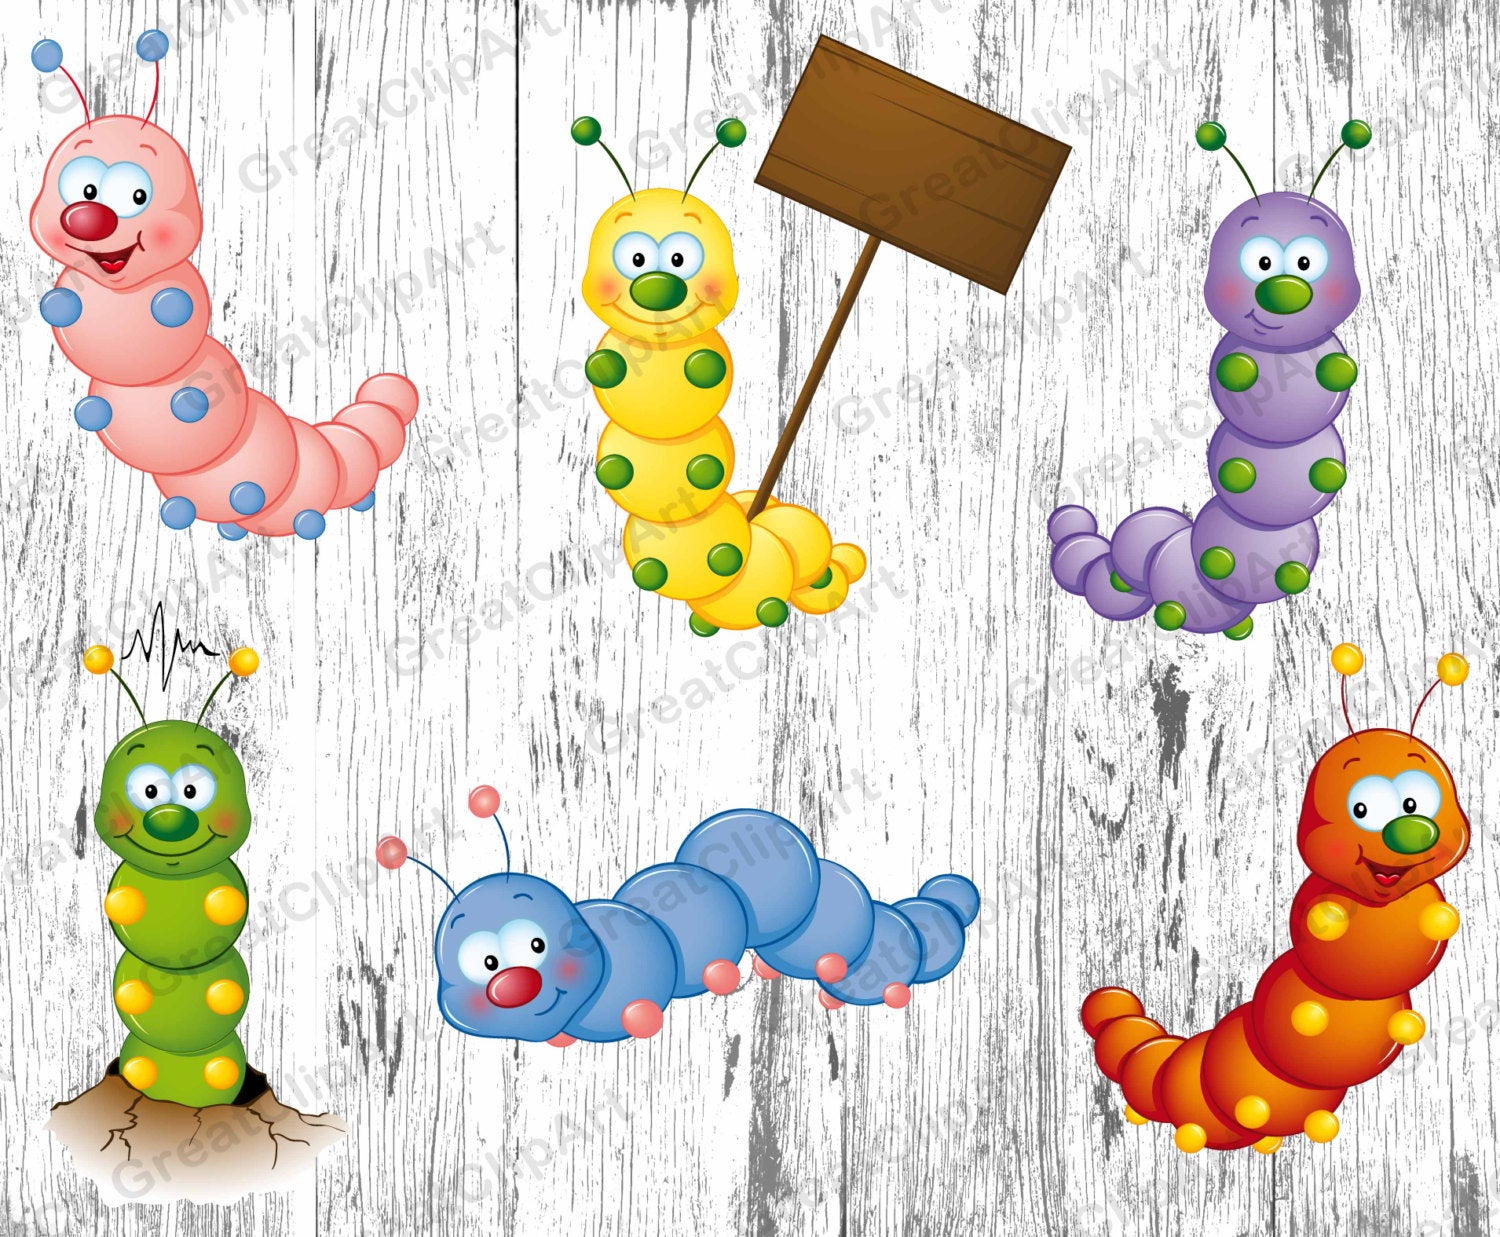 6 Insects Kids Animals clipart, worm clipart, caterpillar clipart, animals  clipart,kids clipart,digital animals,Insects clipart,scrapbooking.